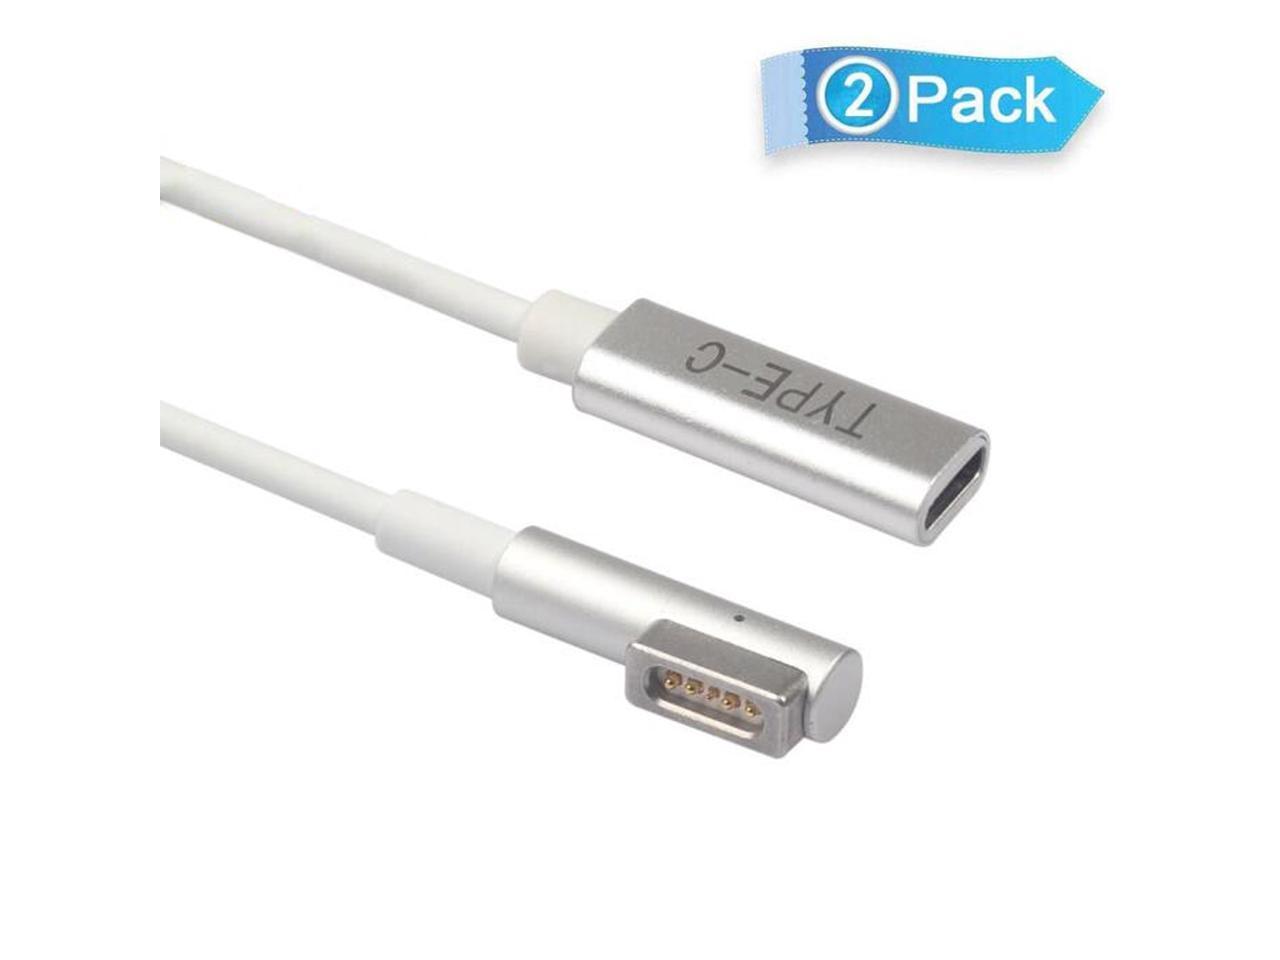 charging cable for macbook air 2012